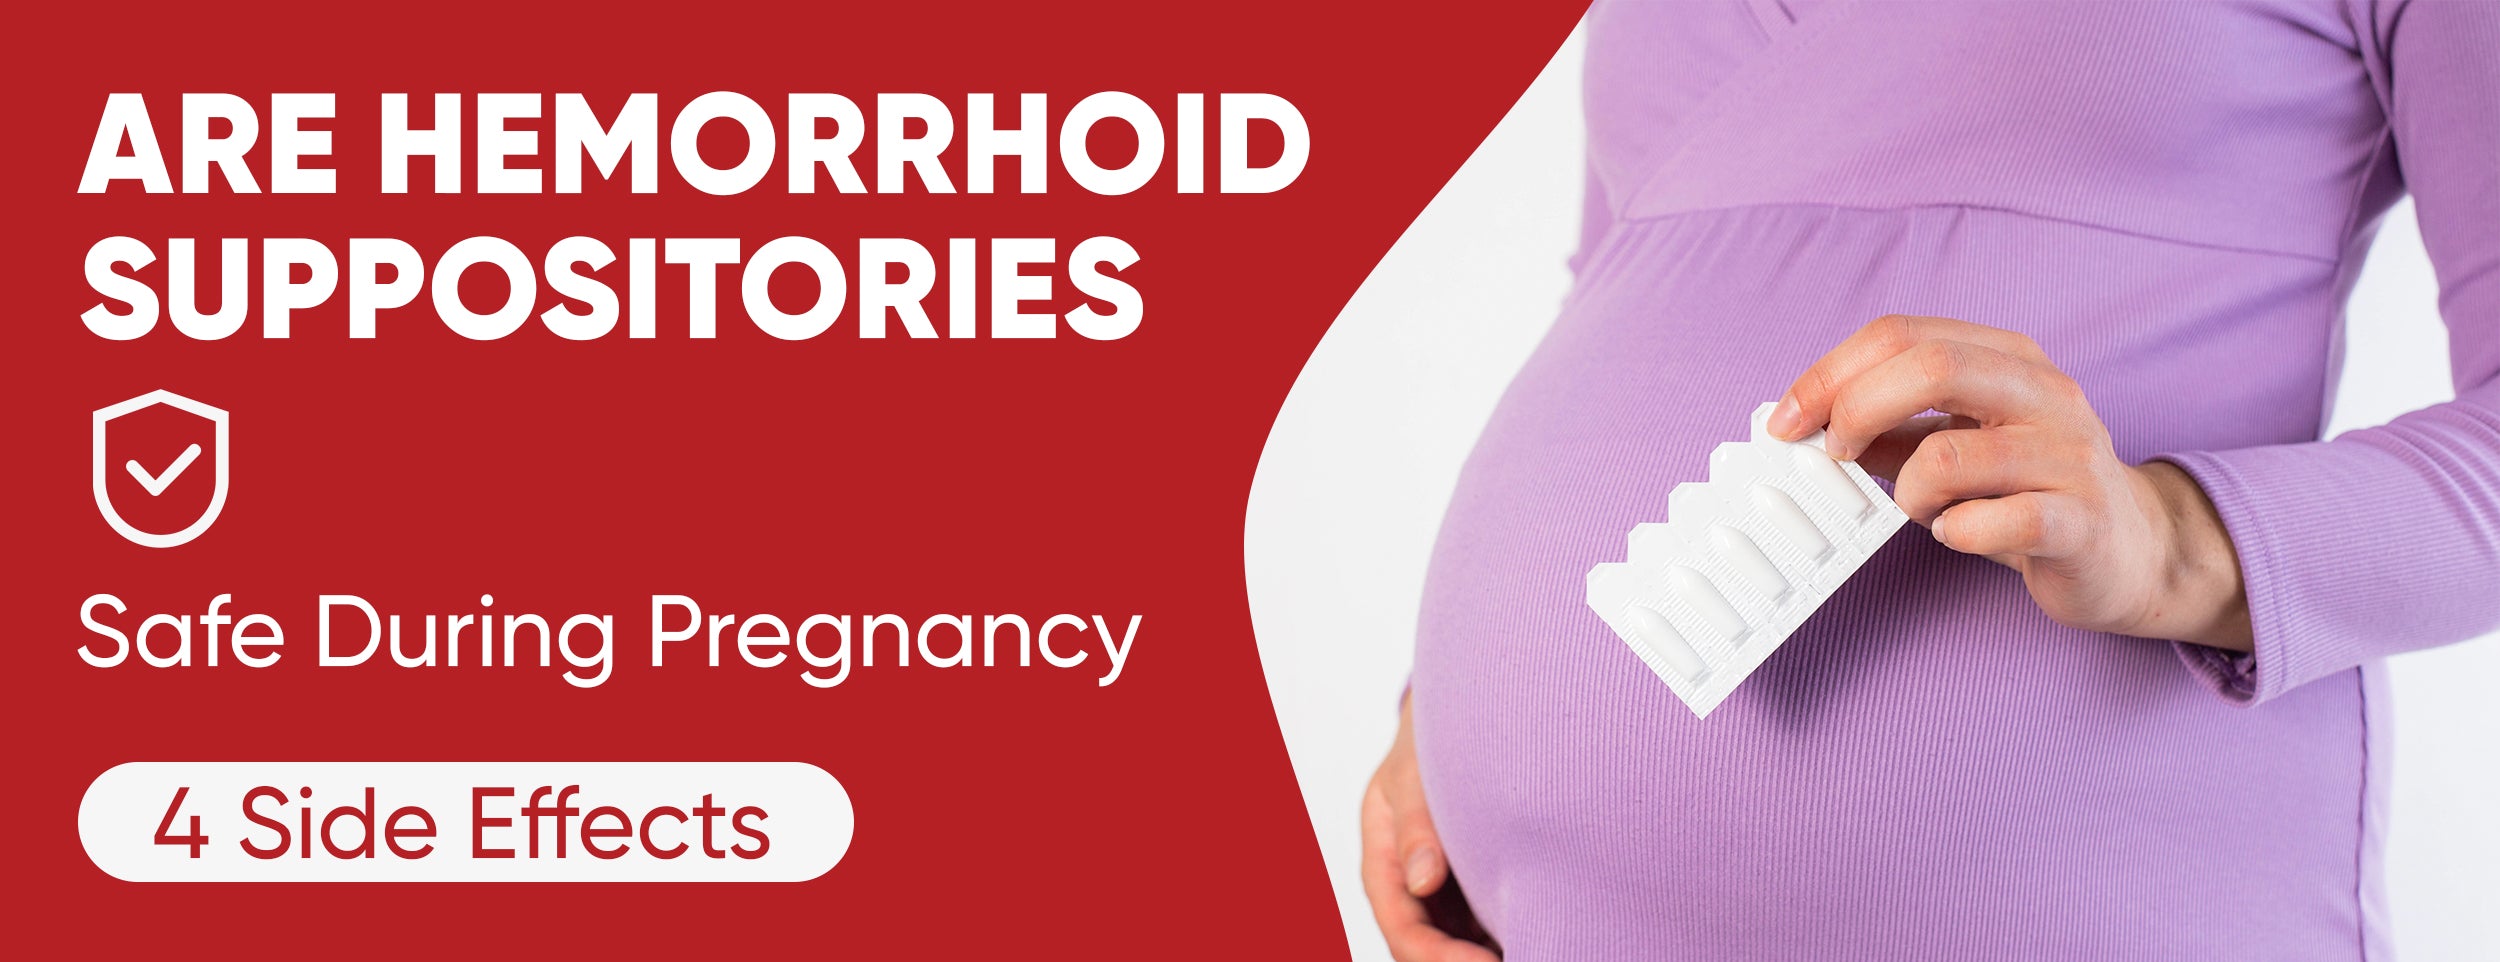 Suppositories for hemorrhoids during pregnancy are safe